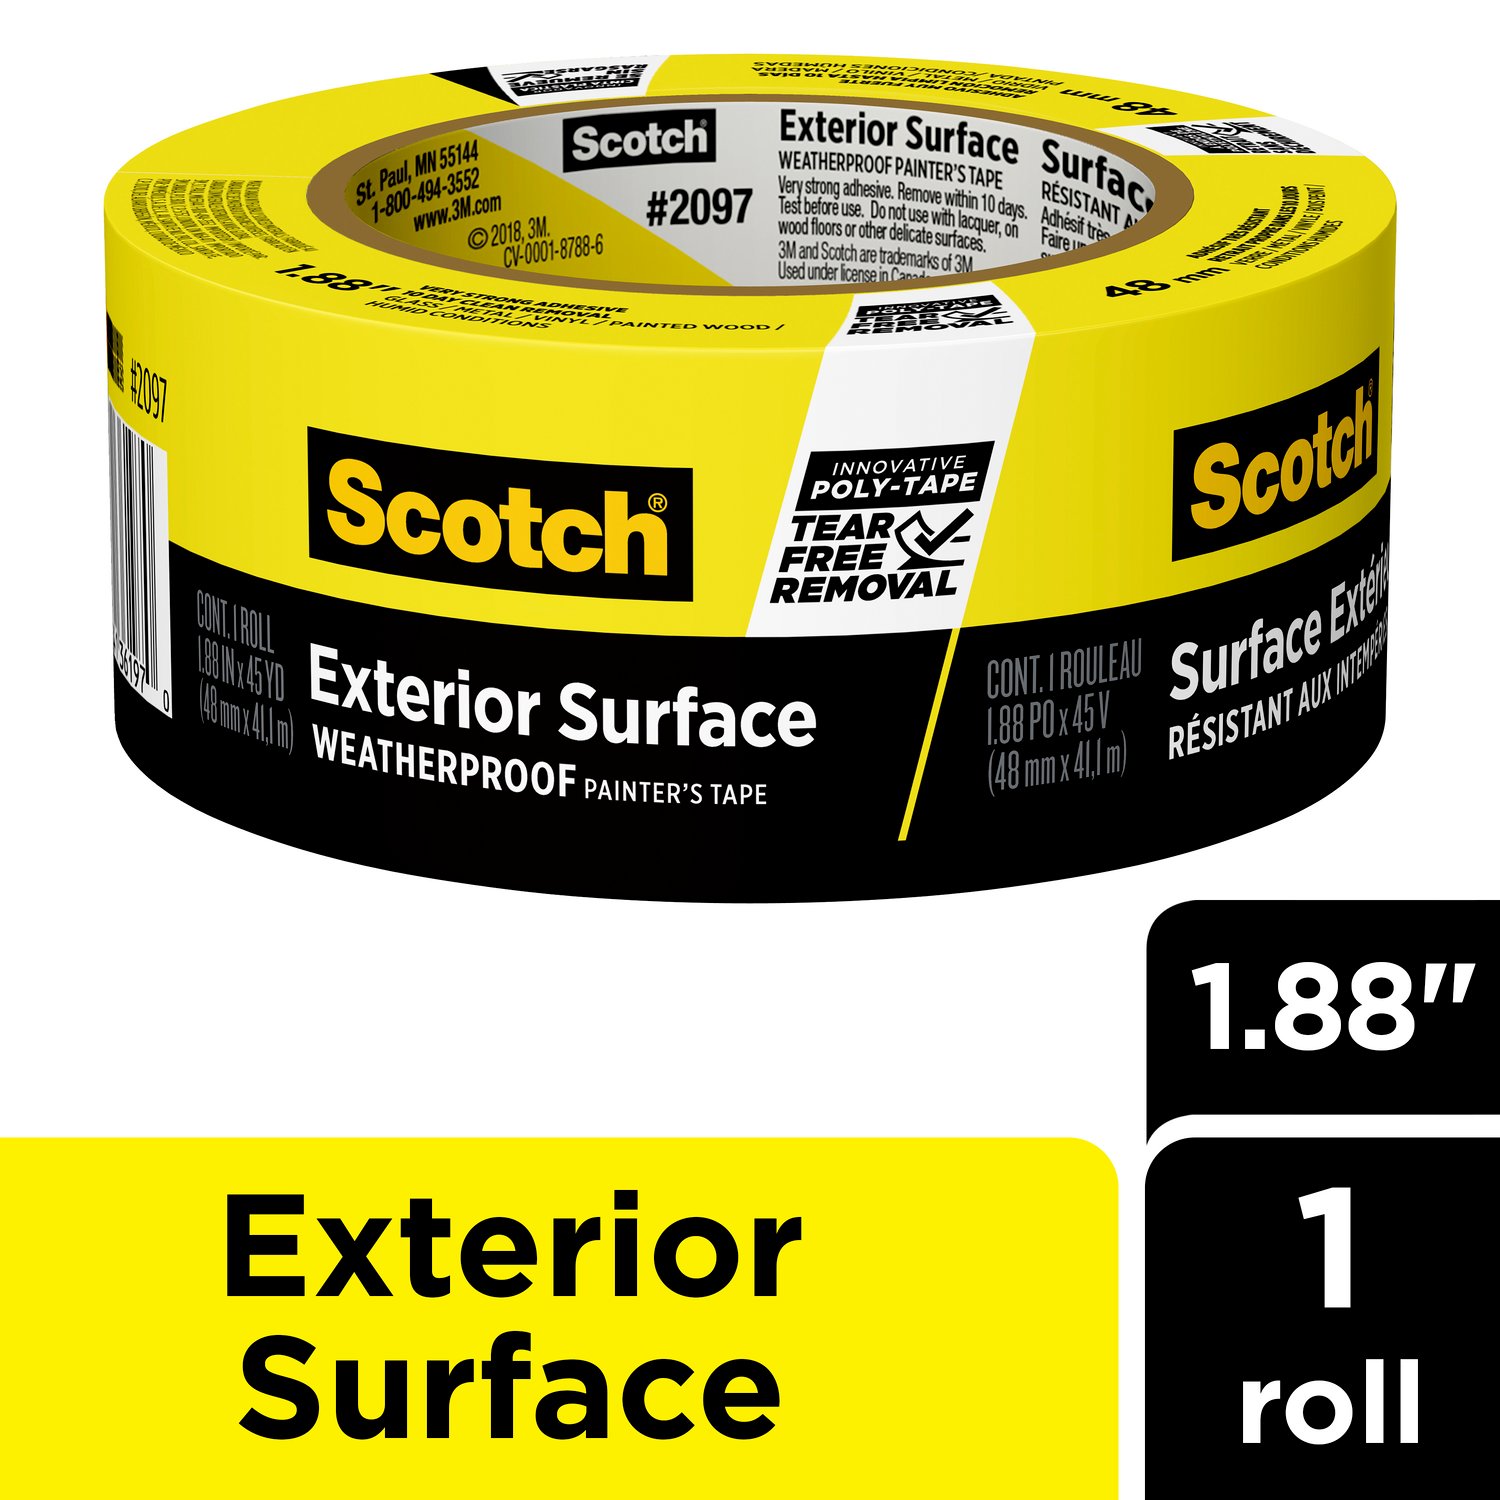 7100185564 - Scotch Exterior Surface Painter's Tape 2097-48EC-XS, 1.88 in x 45 yd
(48mm x 41,1m)